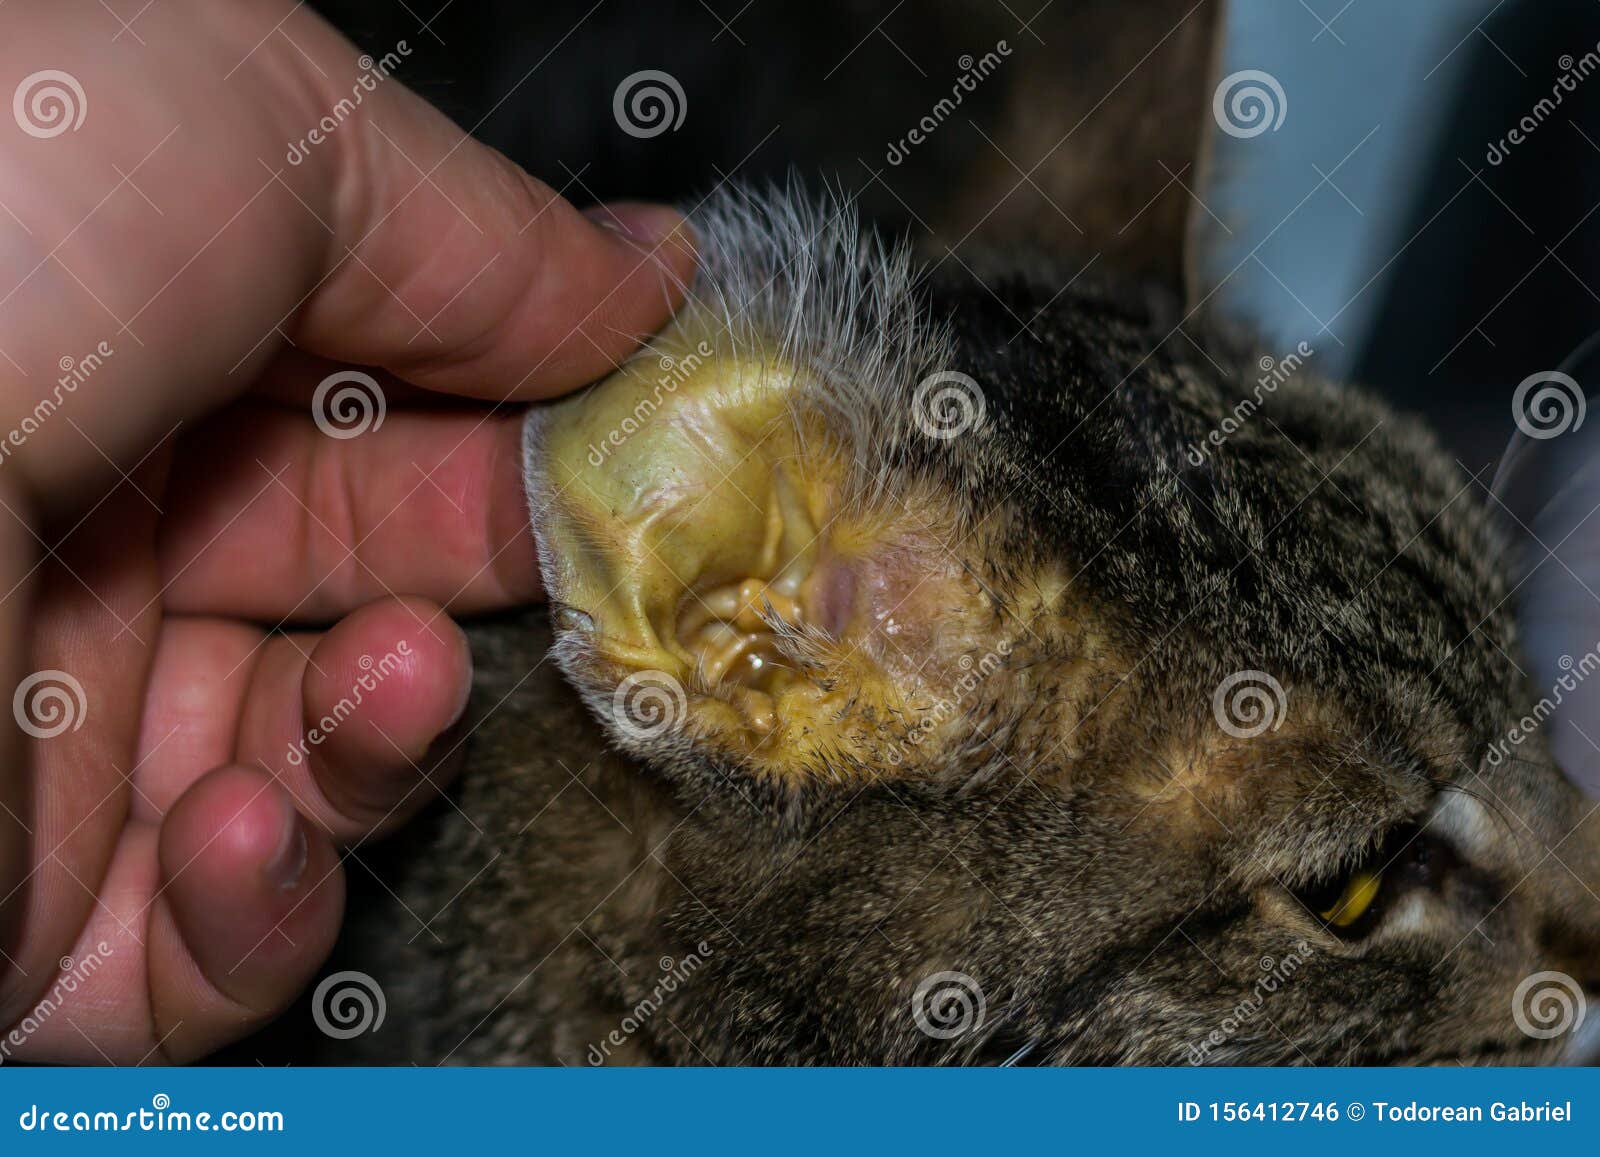 Adult Cat With Liver Failure, Jaundice Skin And Dehydration Stock Photo